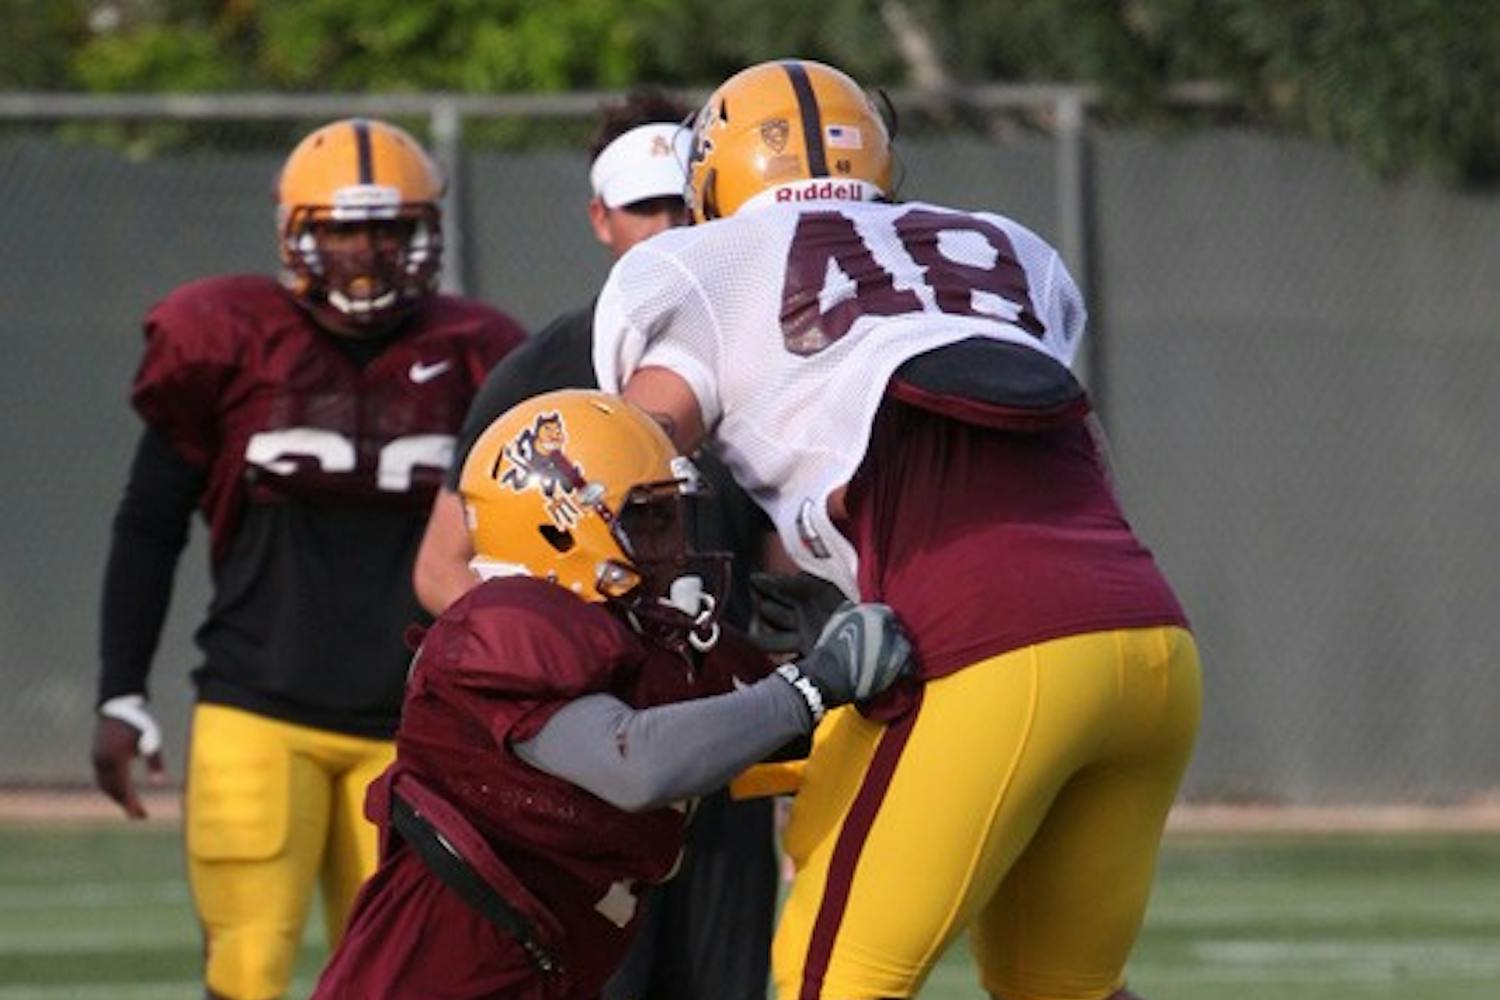 Ball Hawk: ASU junior linebacker Vontaze Burfict brings down redshirt freshman linebacker Carl Bradford during spring practice on March 29 in Tempe. The Sun Devil defense dominated Saturday’s scrimmage while the offense played without three key receivers. (Photo by Beth Easterbrook)